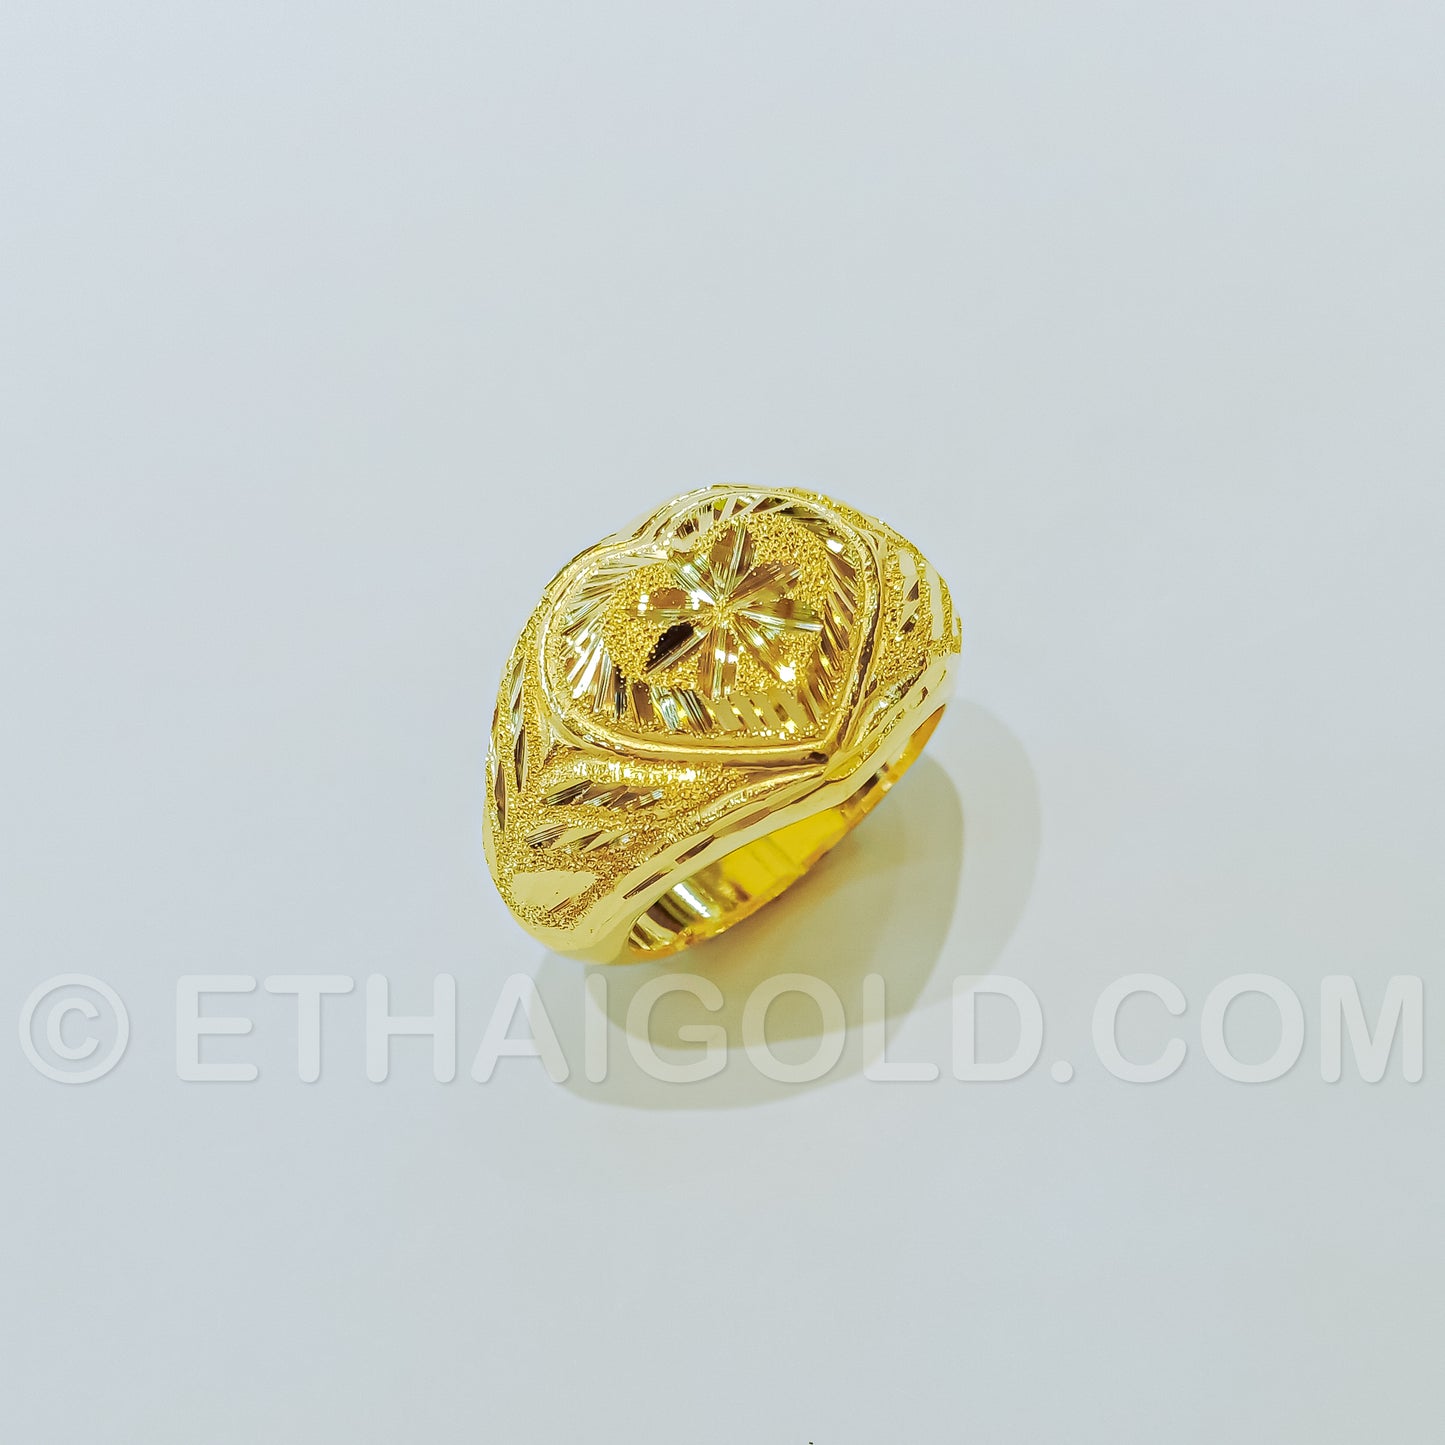 1/4 BAHT POLISHED SPARKLING DIAMOND-CUT HOLLOW HEART RING IN 23K GOLD (ID: R0701S)